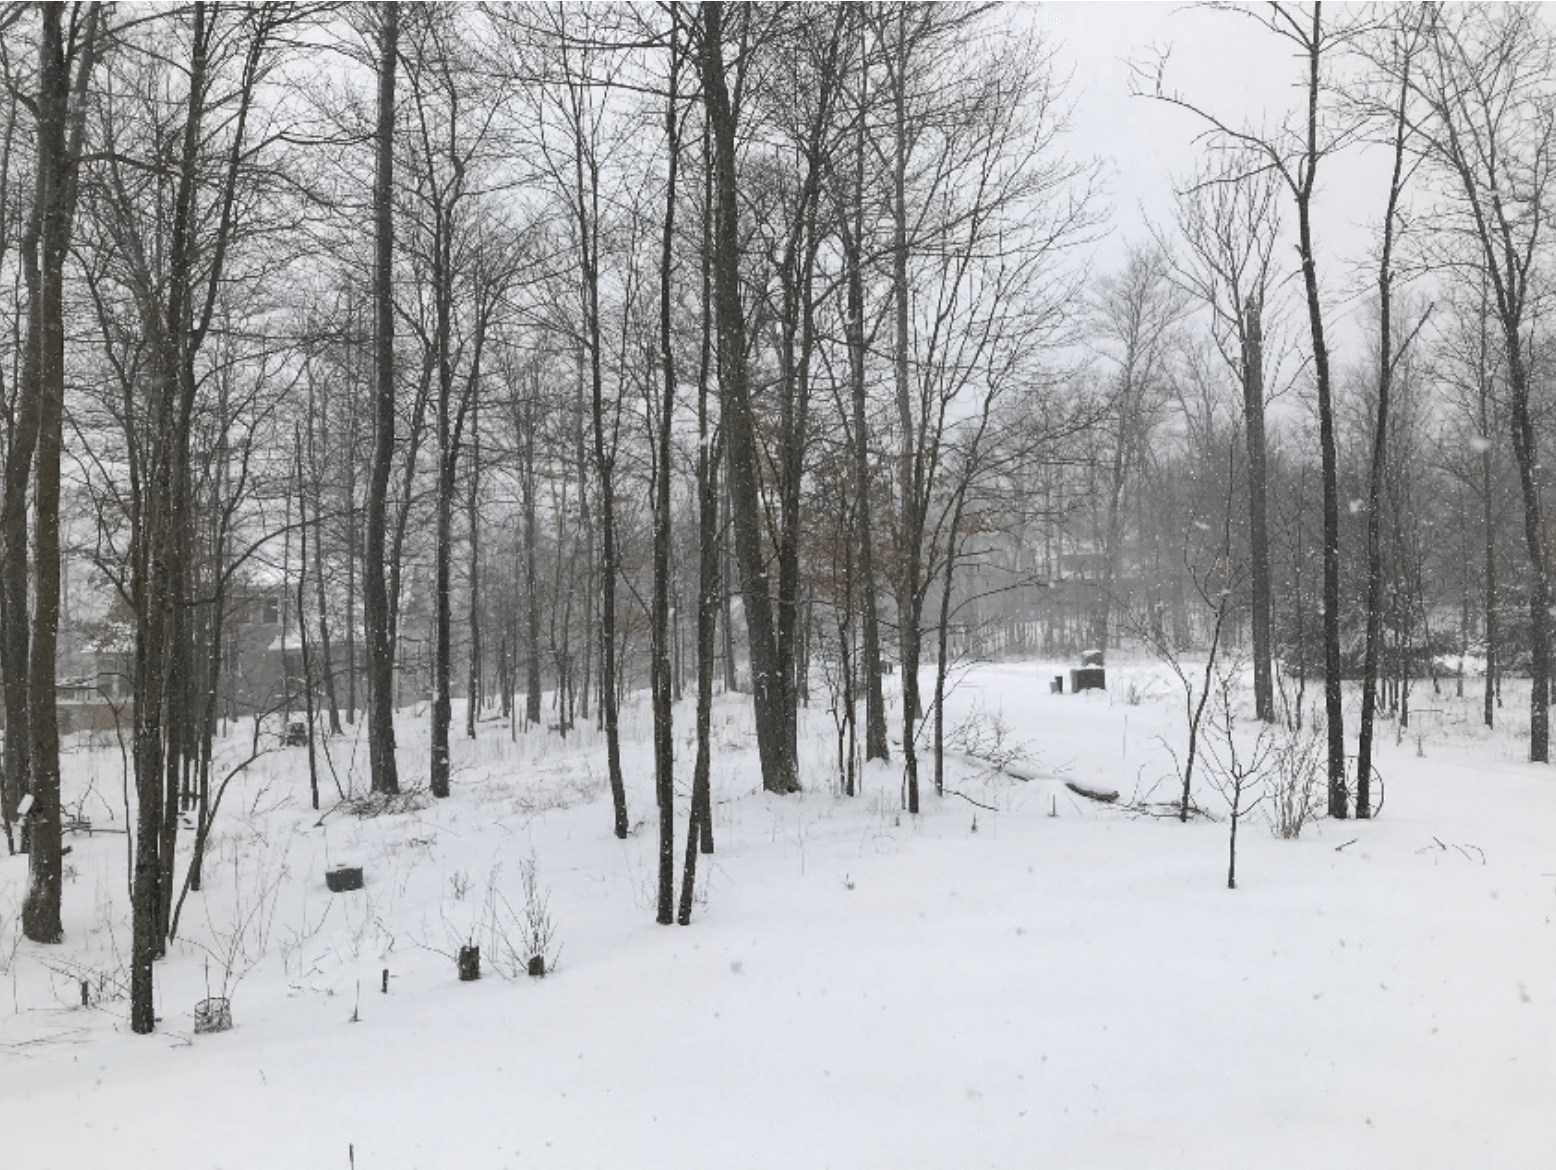 Mike's Backyard in Deep Creek Lake, MD on the first day of spring